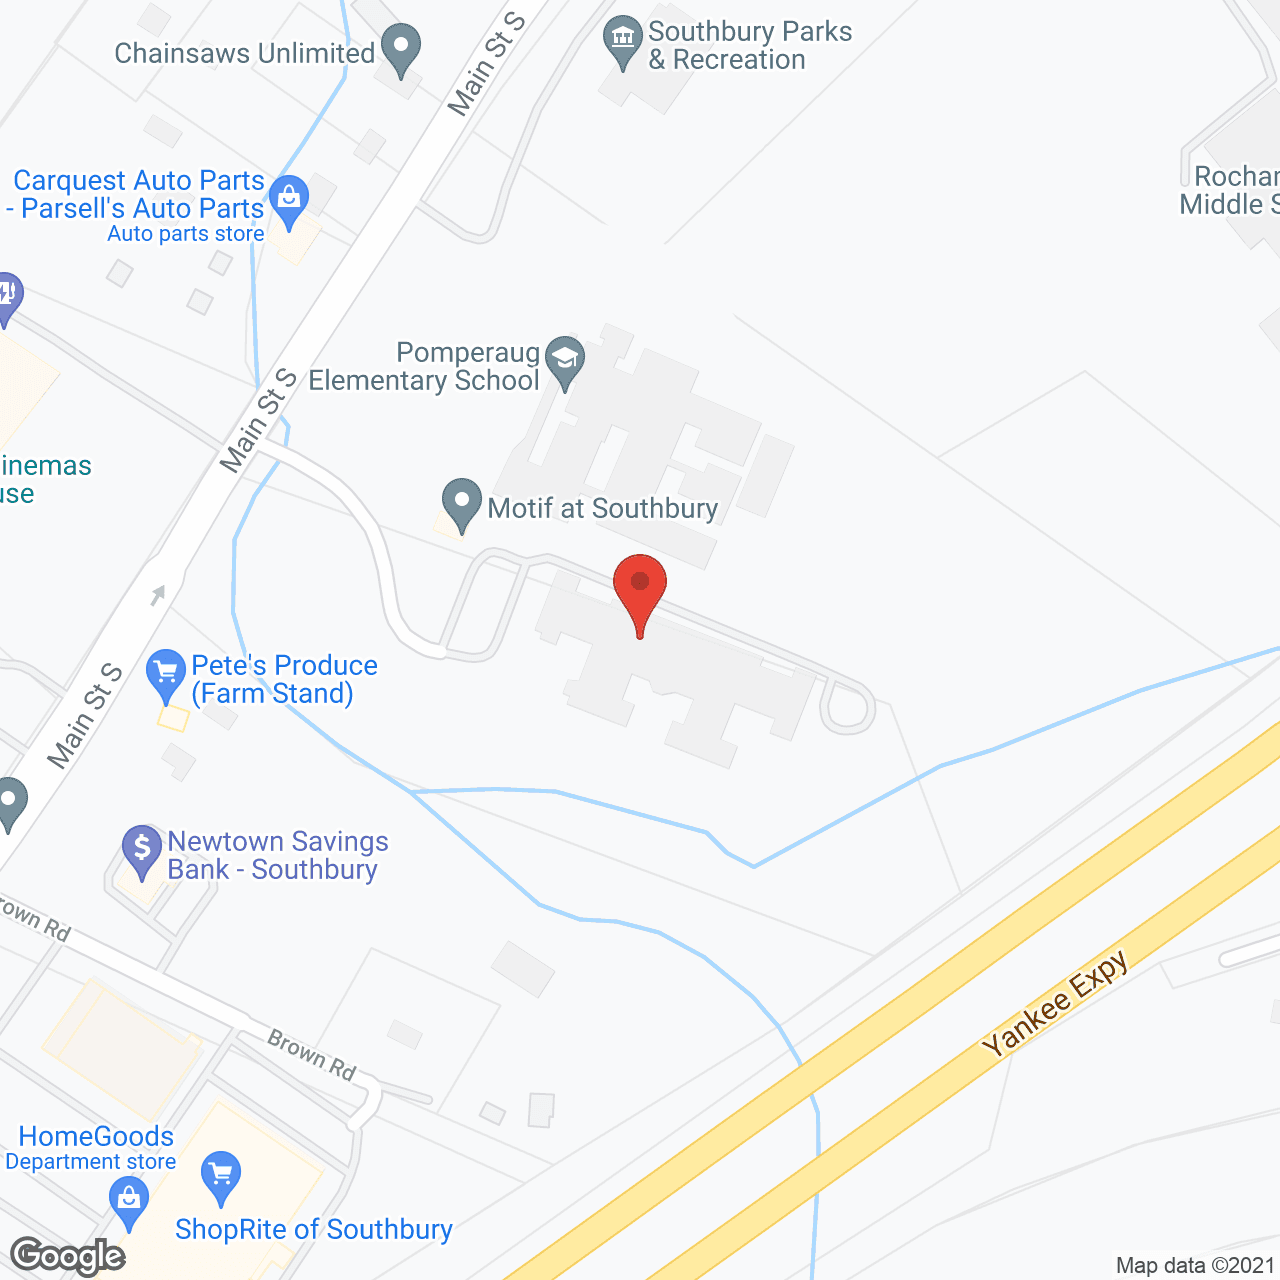 Monarch Southbury in google map